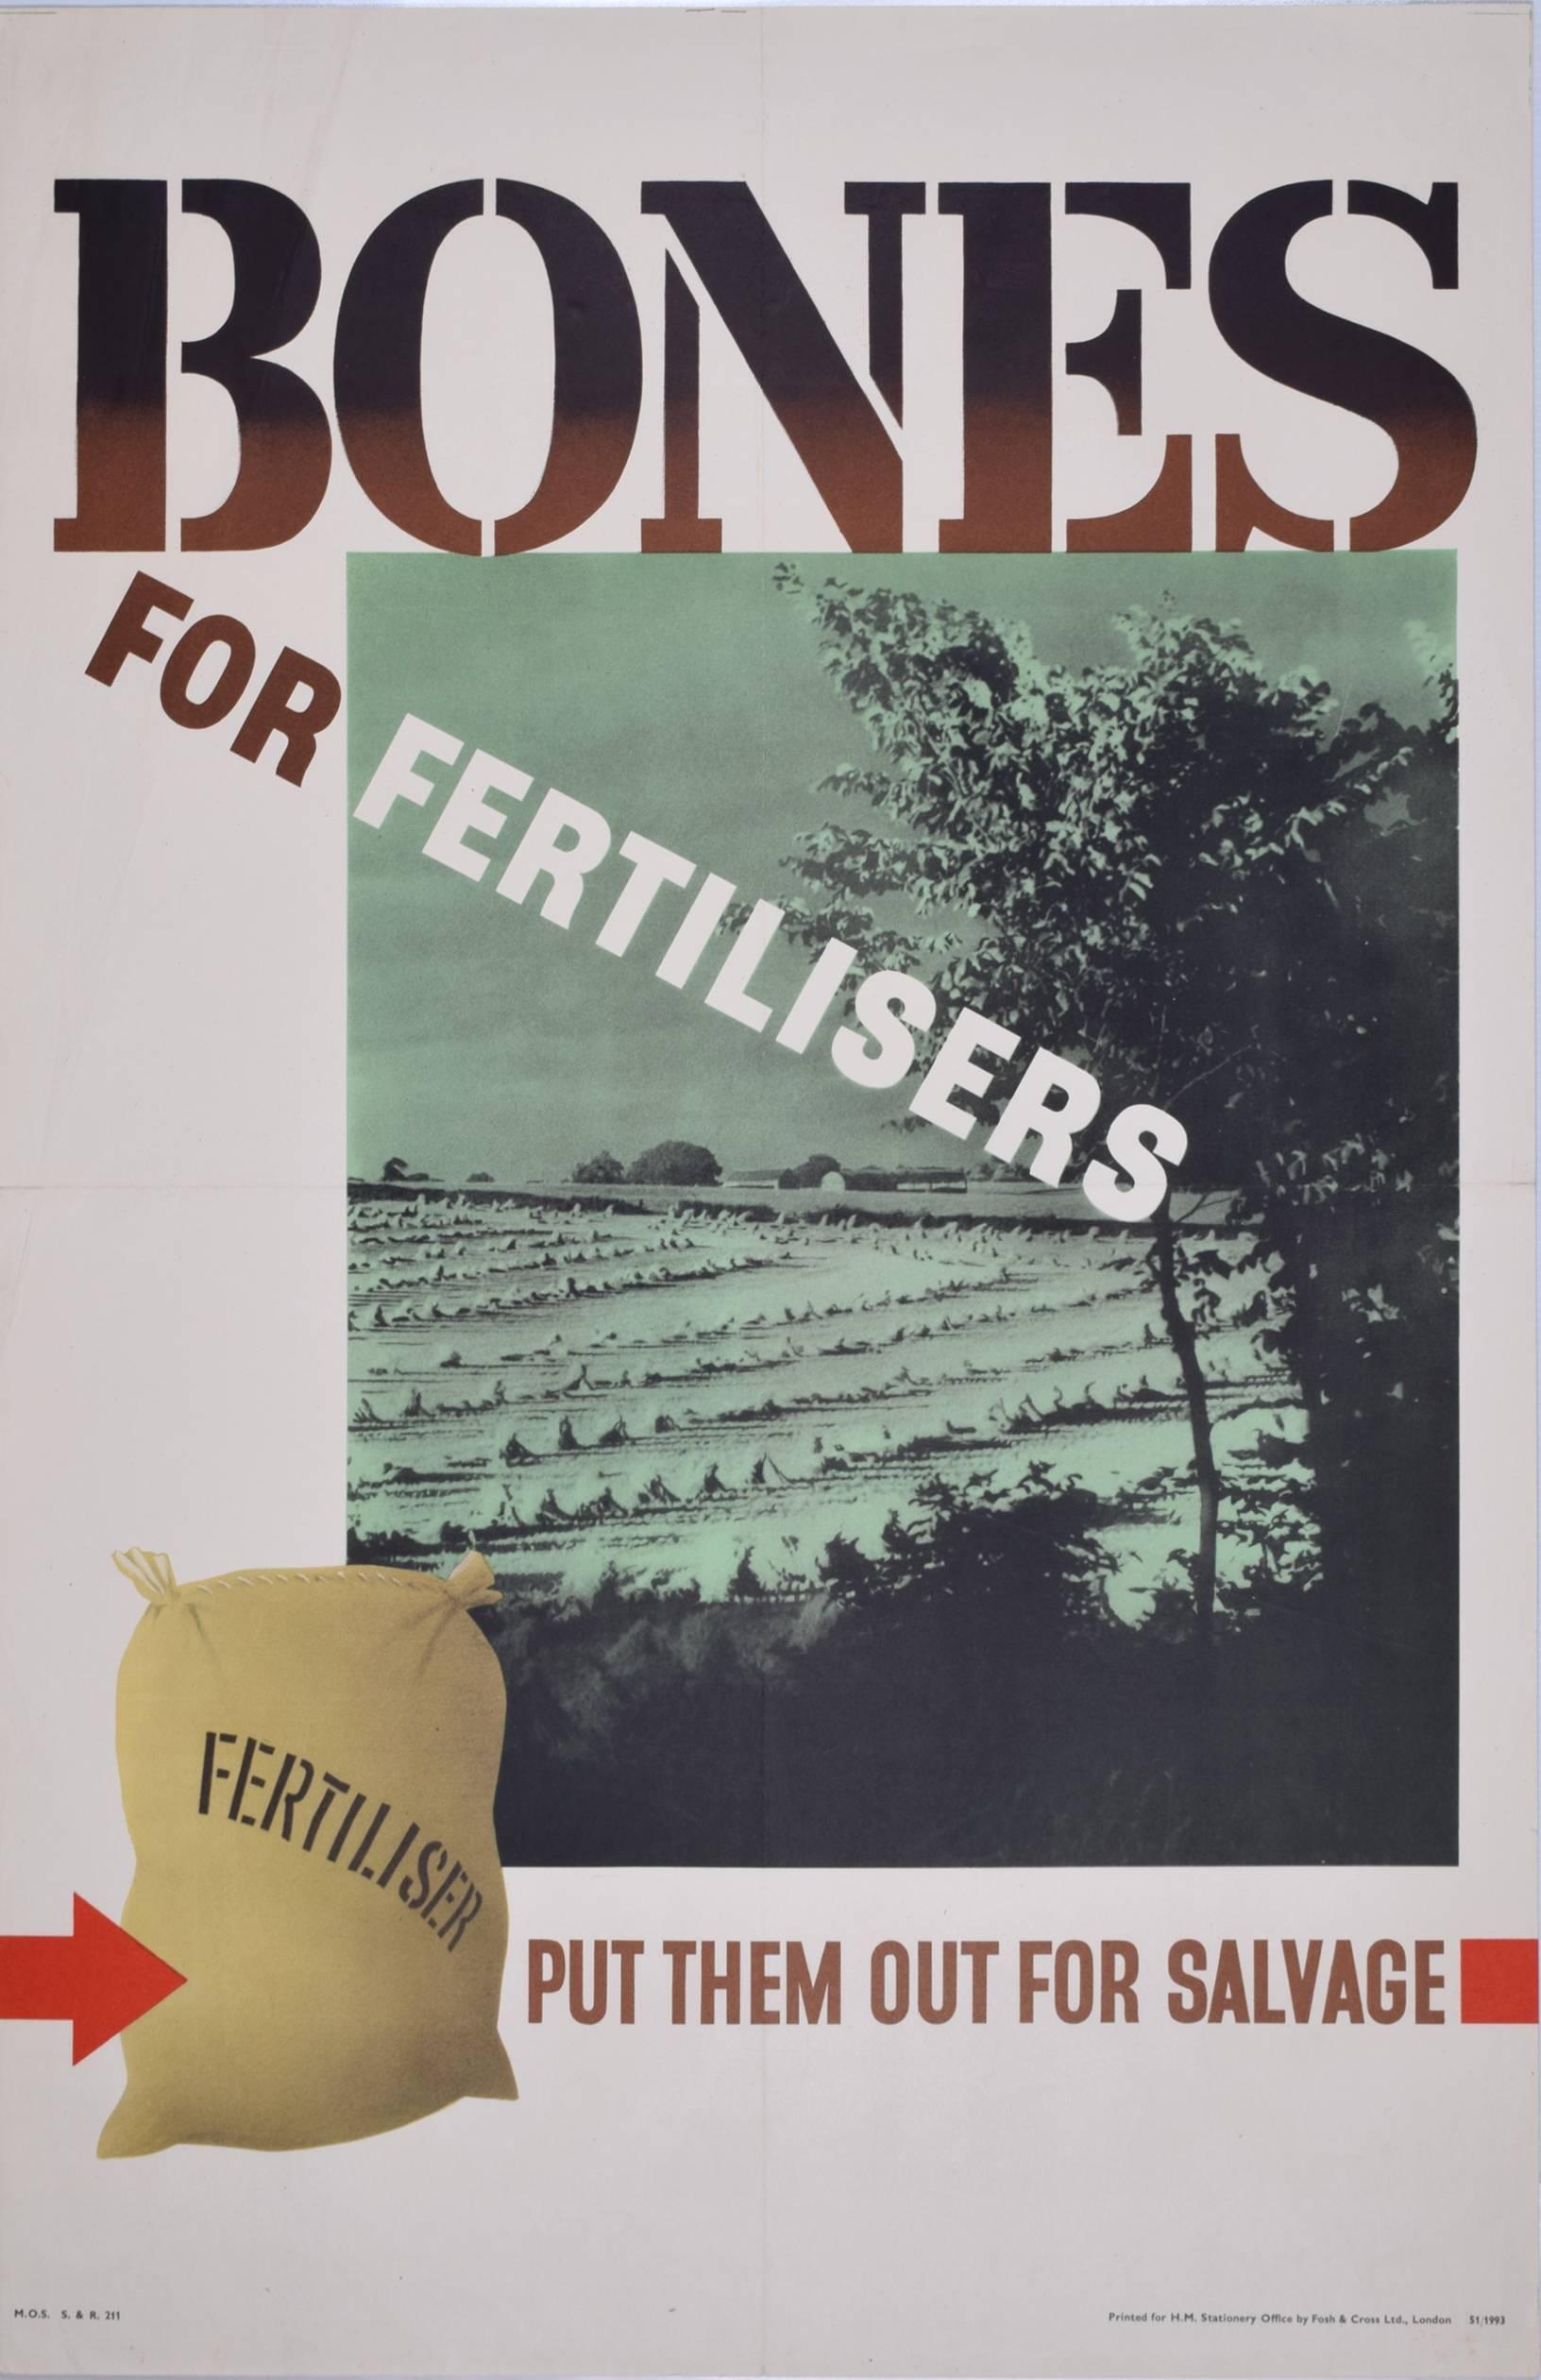 Unknown Print - Bones For Fertilisers - Original WW2 Poster: Waste not want not